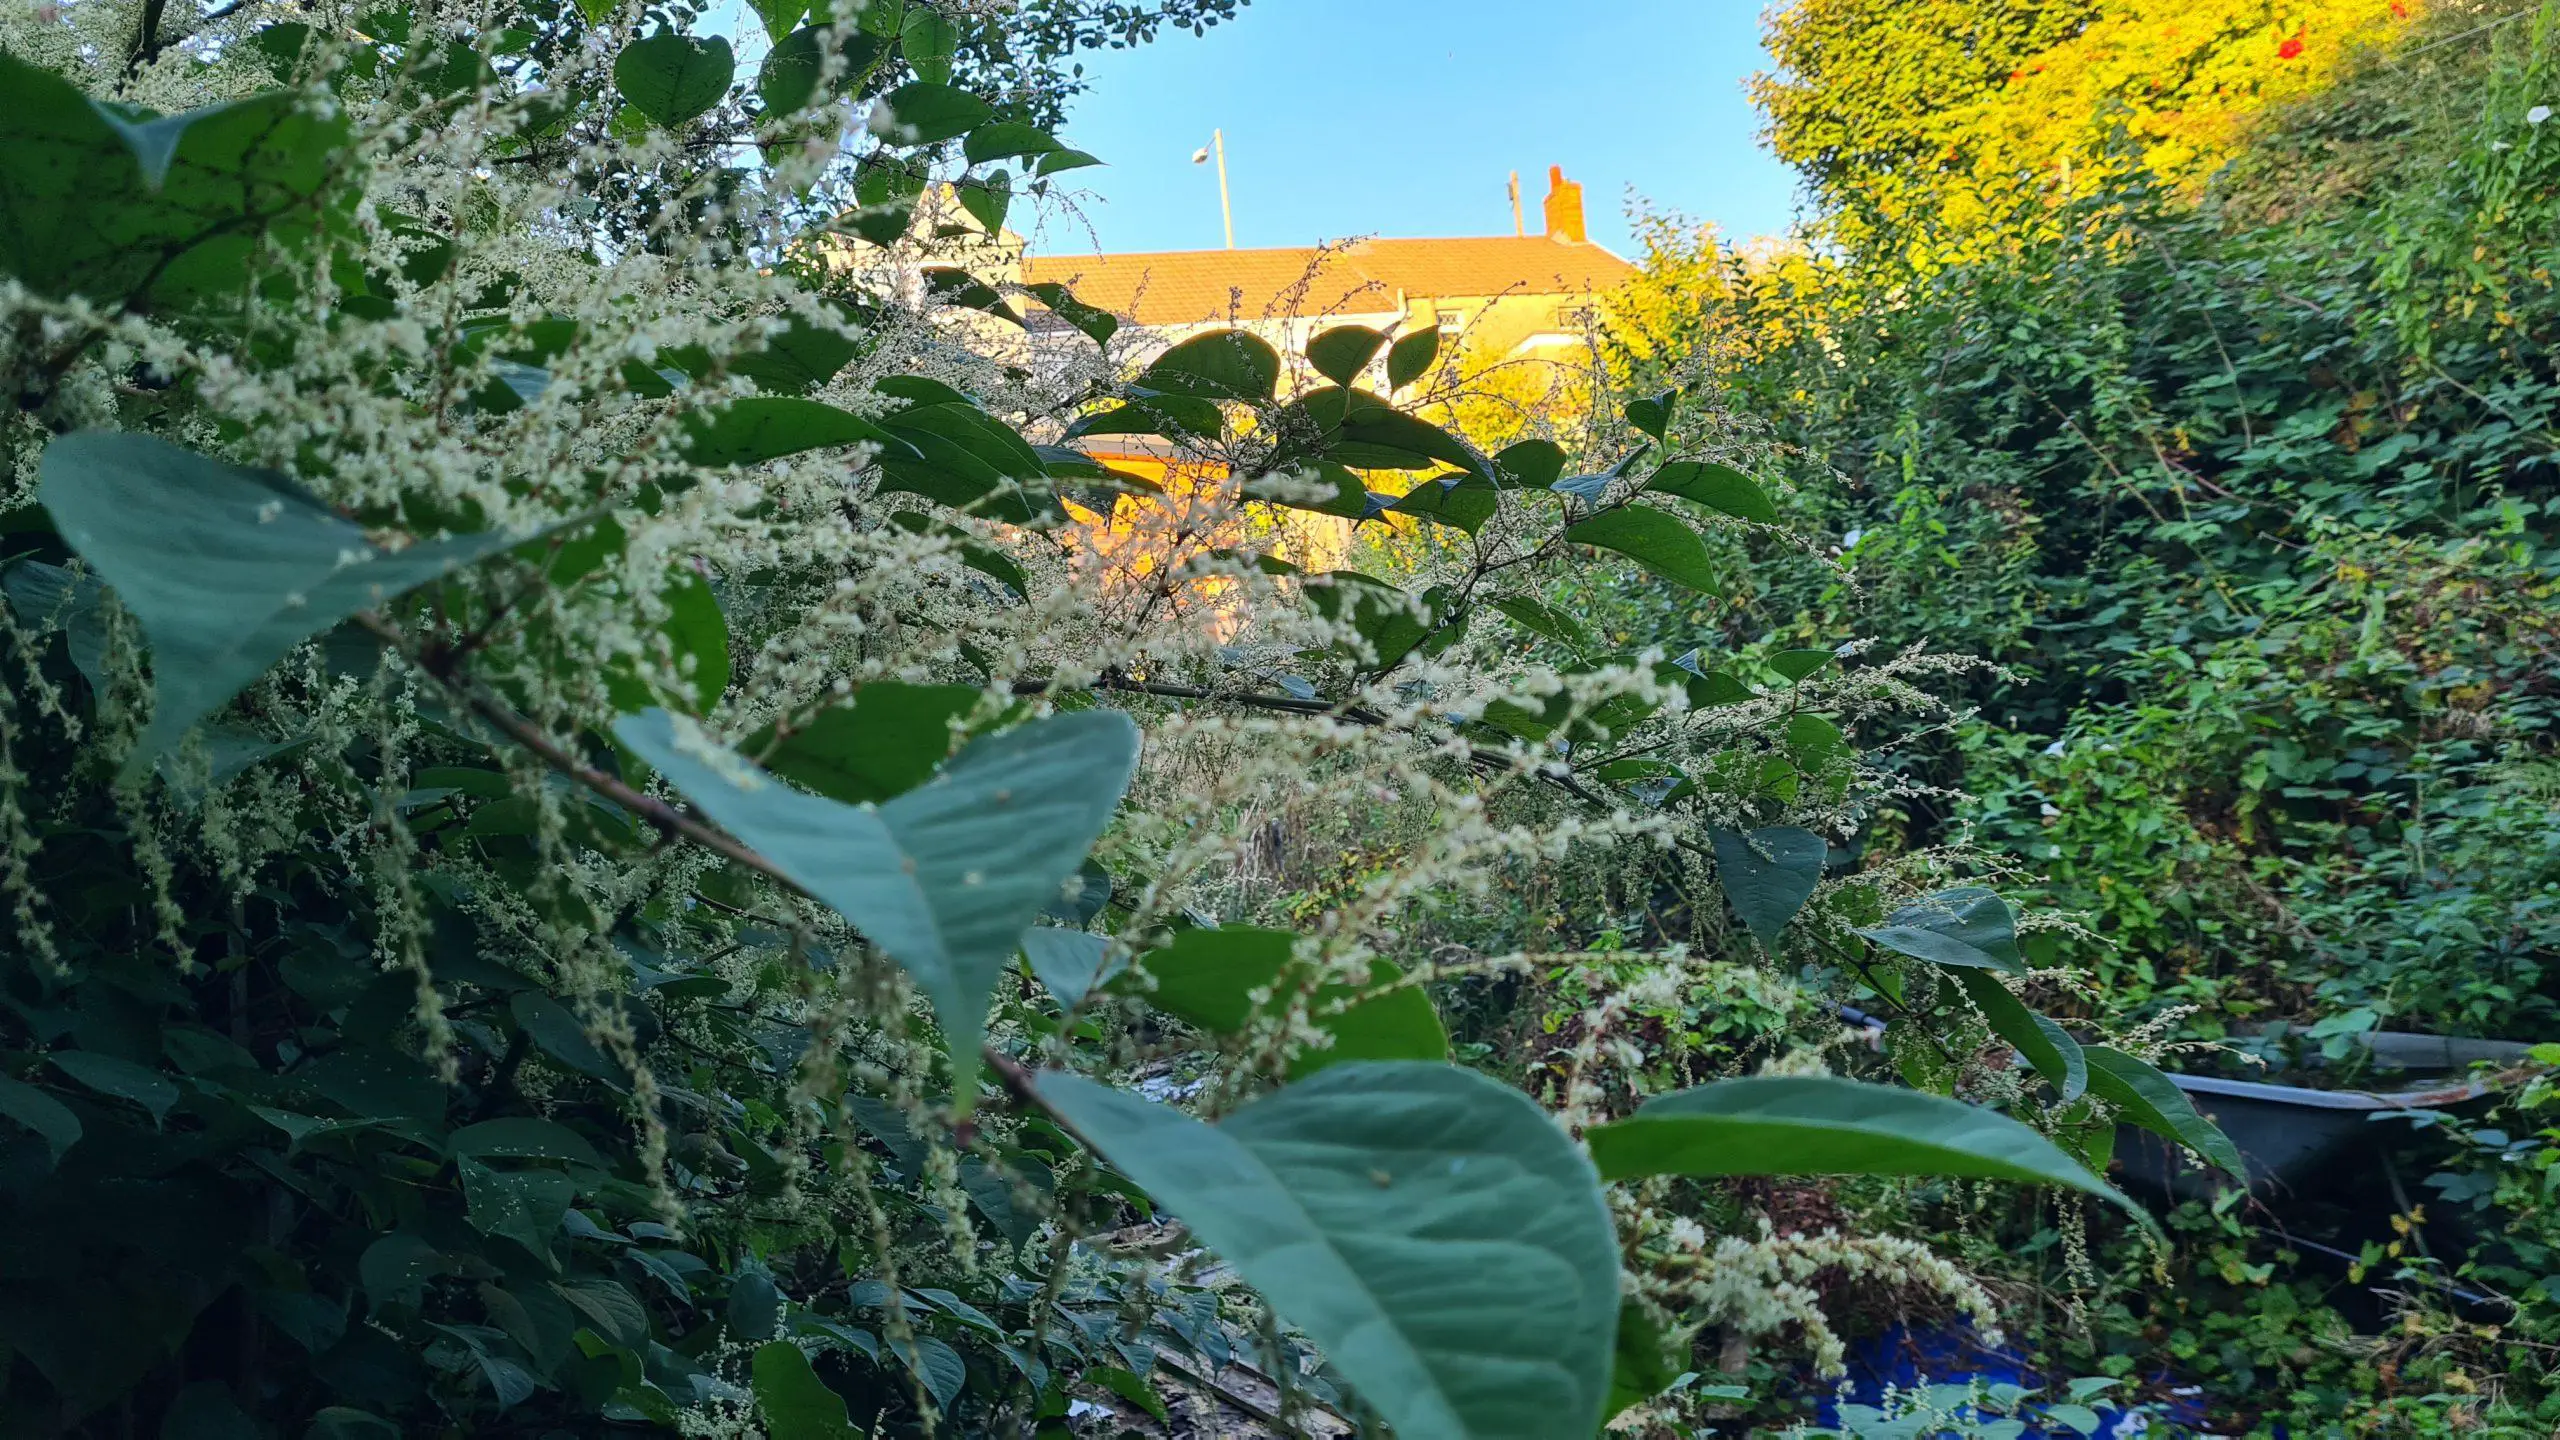 Controlling the invasive species that is Japanese Knotweed